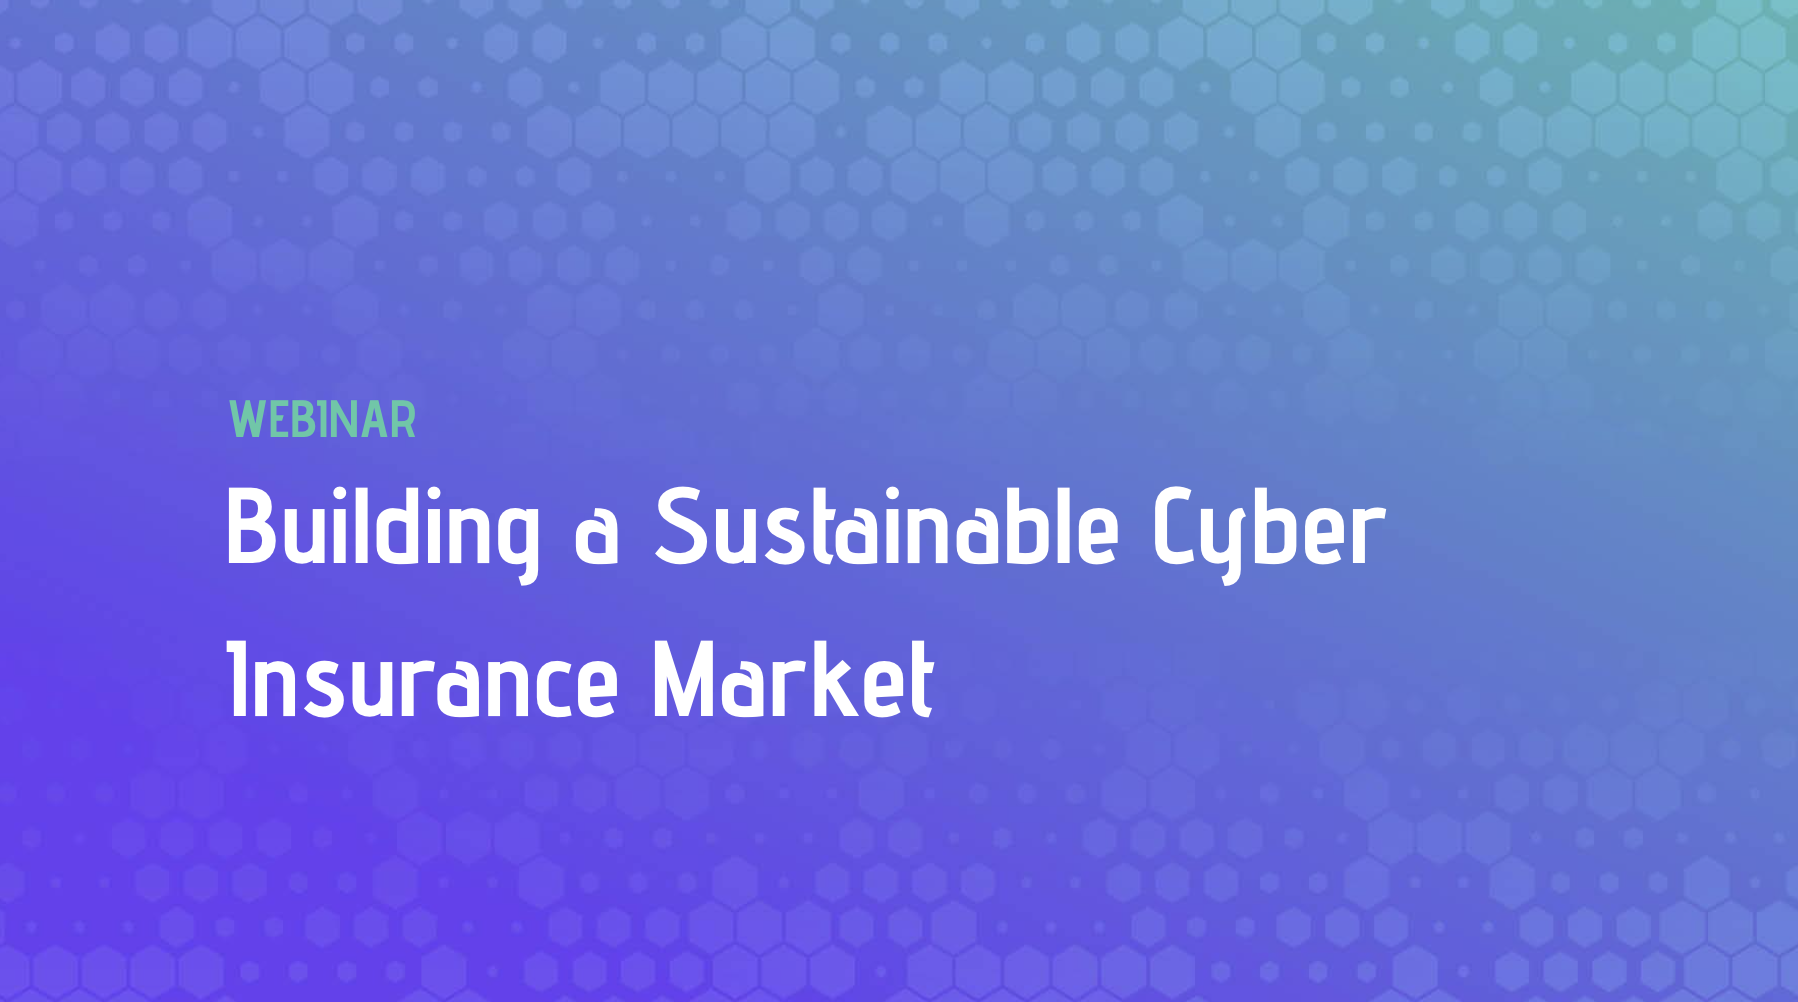 Building a Sustainable Cyber Insurance Market